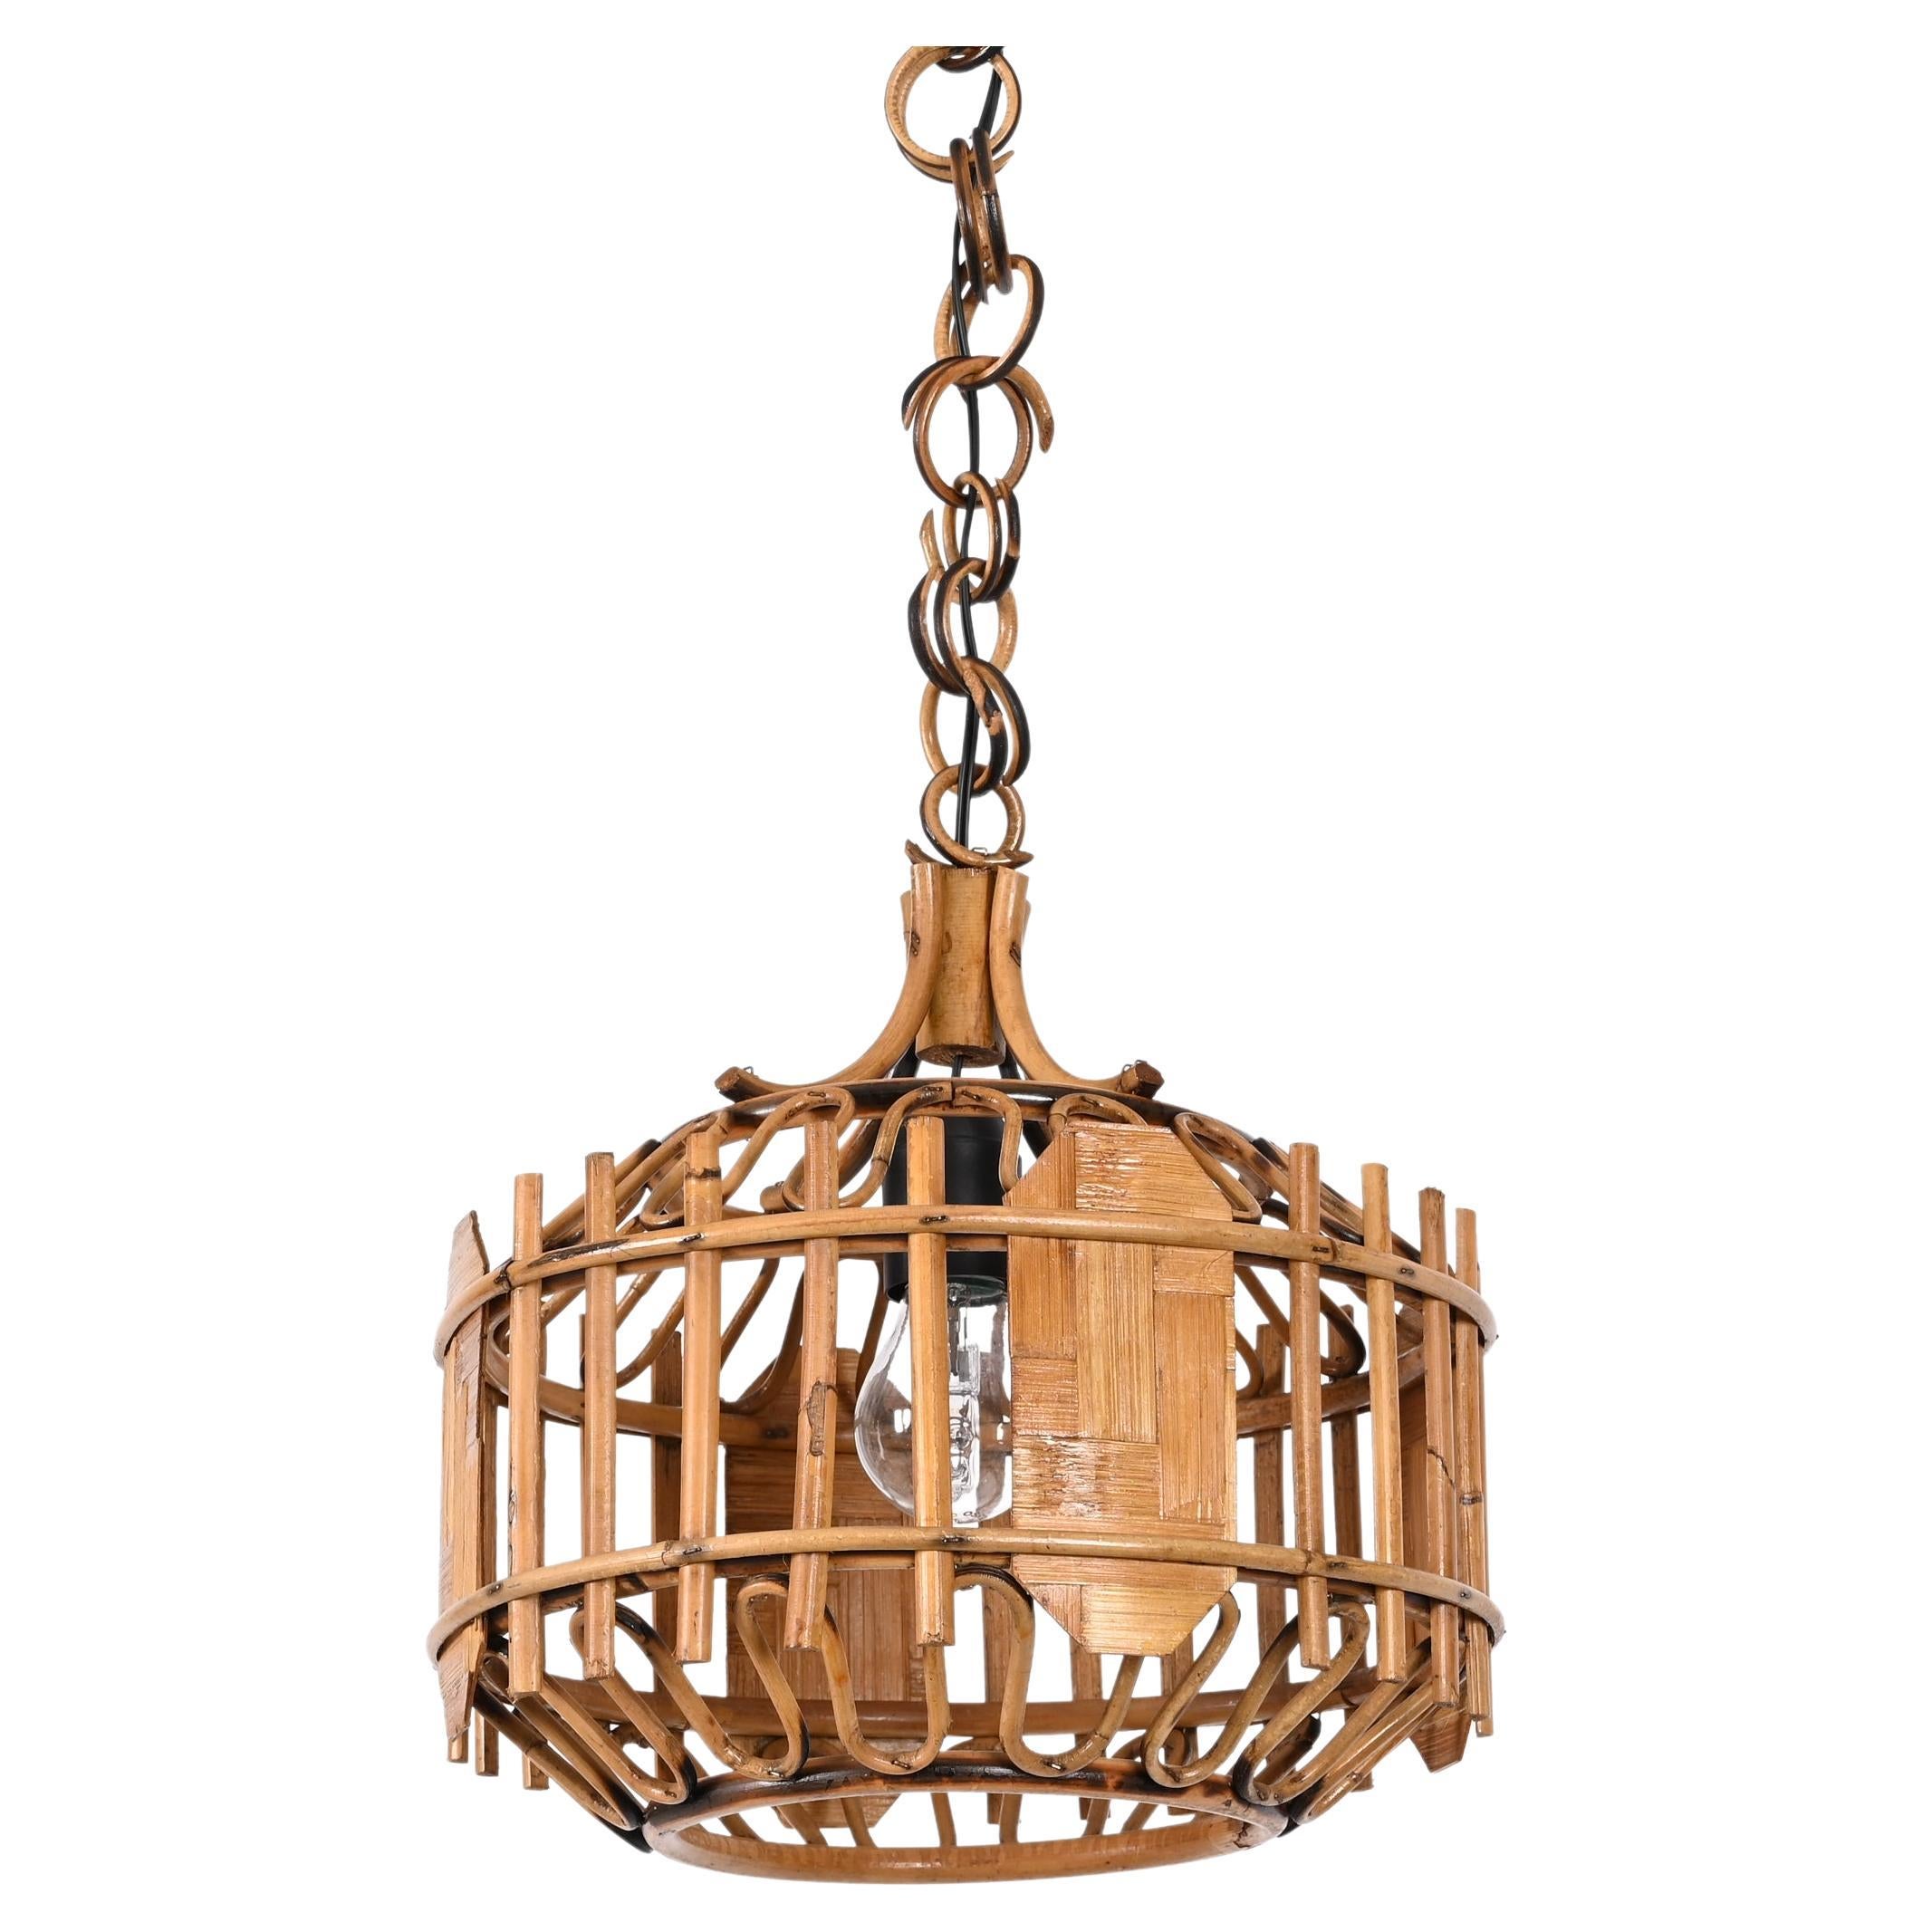 Midcentury French Riviera Bambo and Rattan Rounded Italian Chandelier, 1960s For Sale